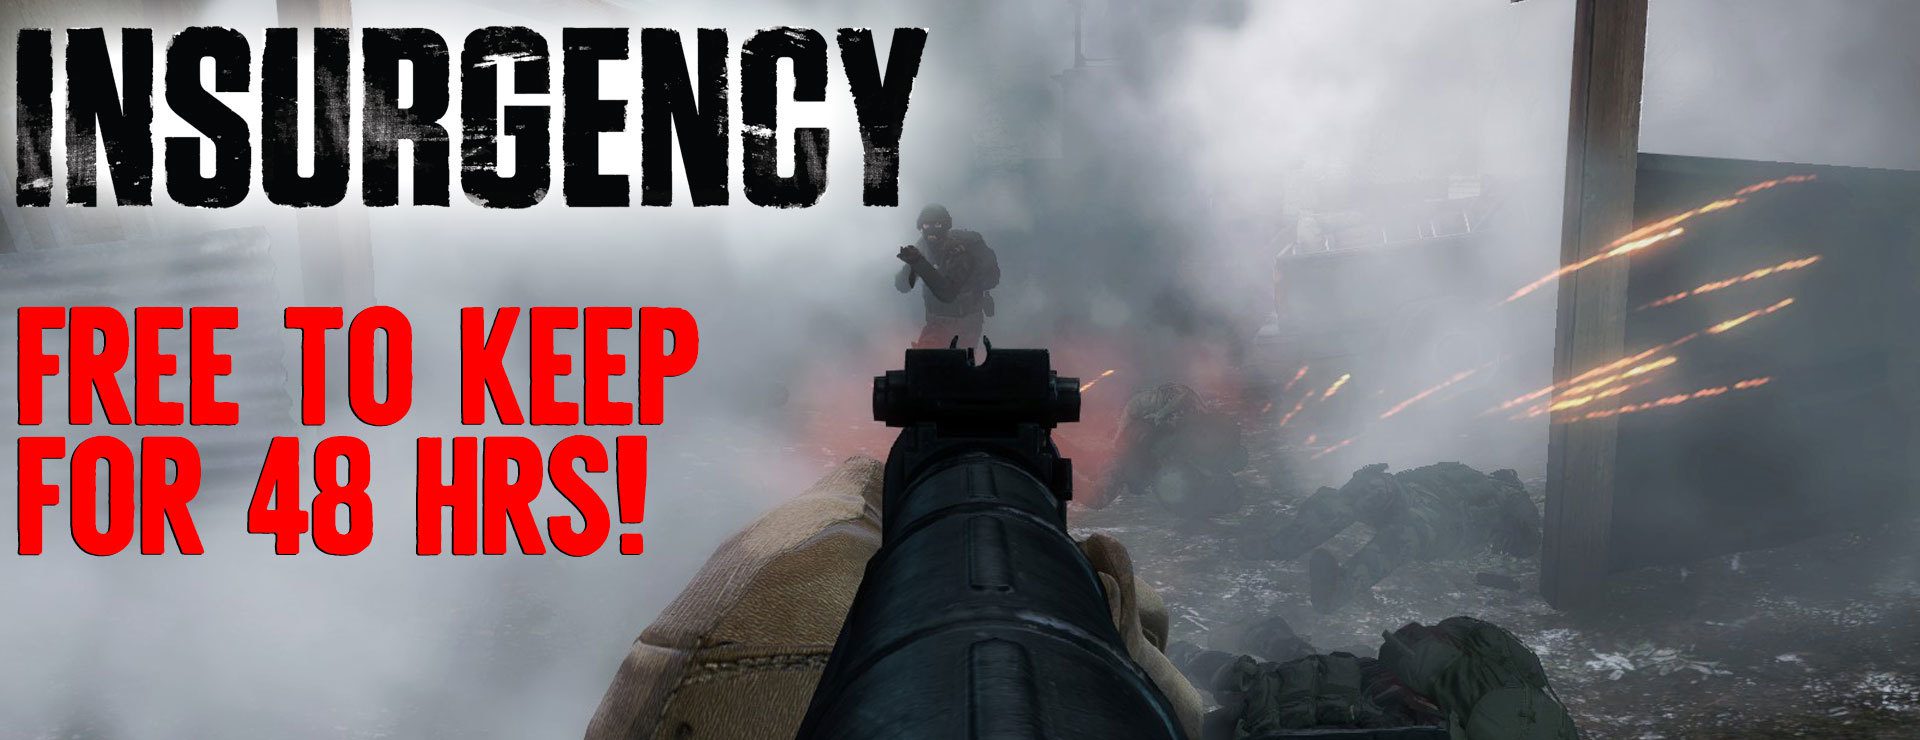 Insurgency is Temporarily Free on Steam